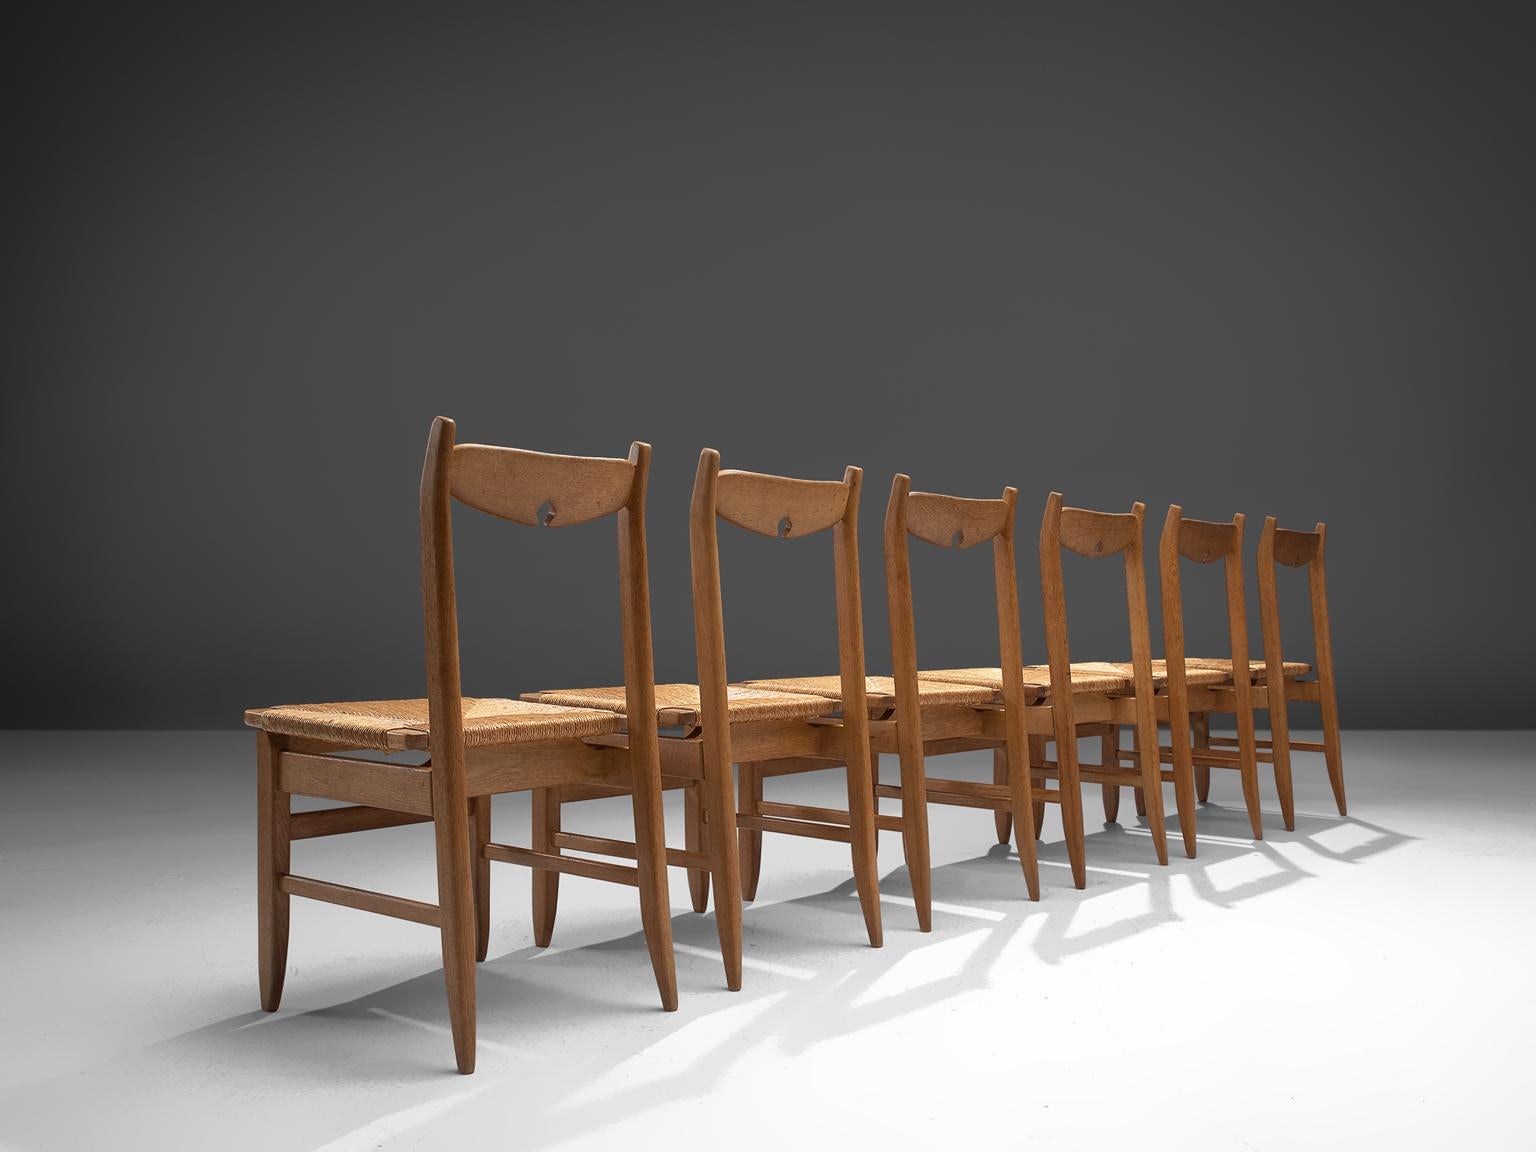 Guillerme & Chambron, set of six dining chairs, oak and rope, France, 1960s.

Set of six elegant dining chairs in solid oak by Guillerme and Chambron. These chairs show the characteristic frame of this French designer duo. Tapered legs and a